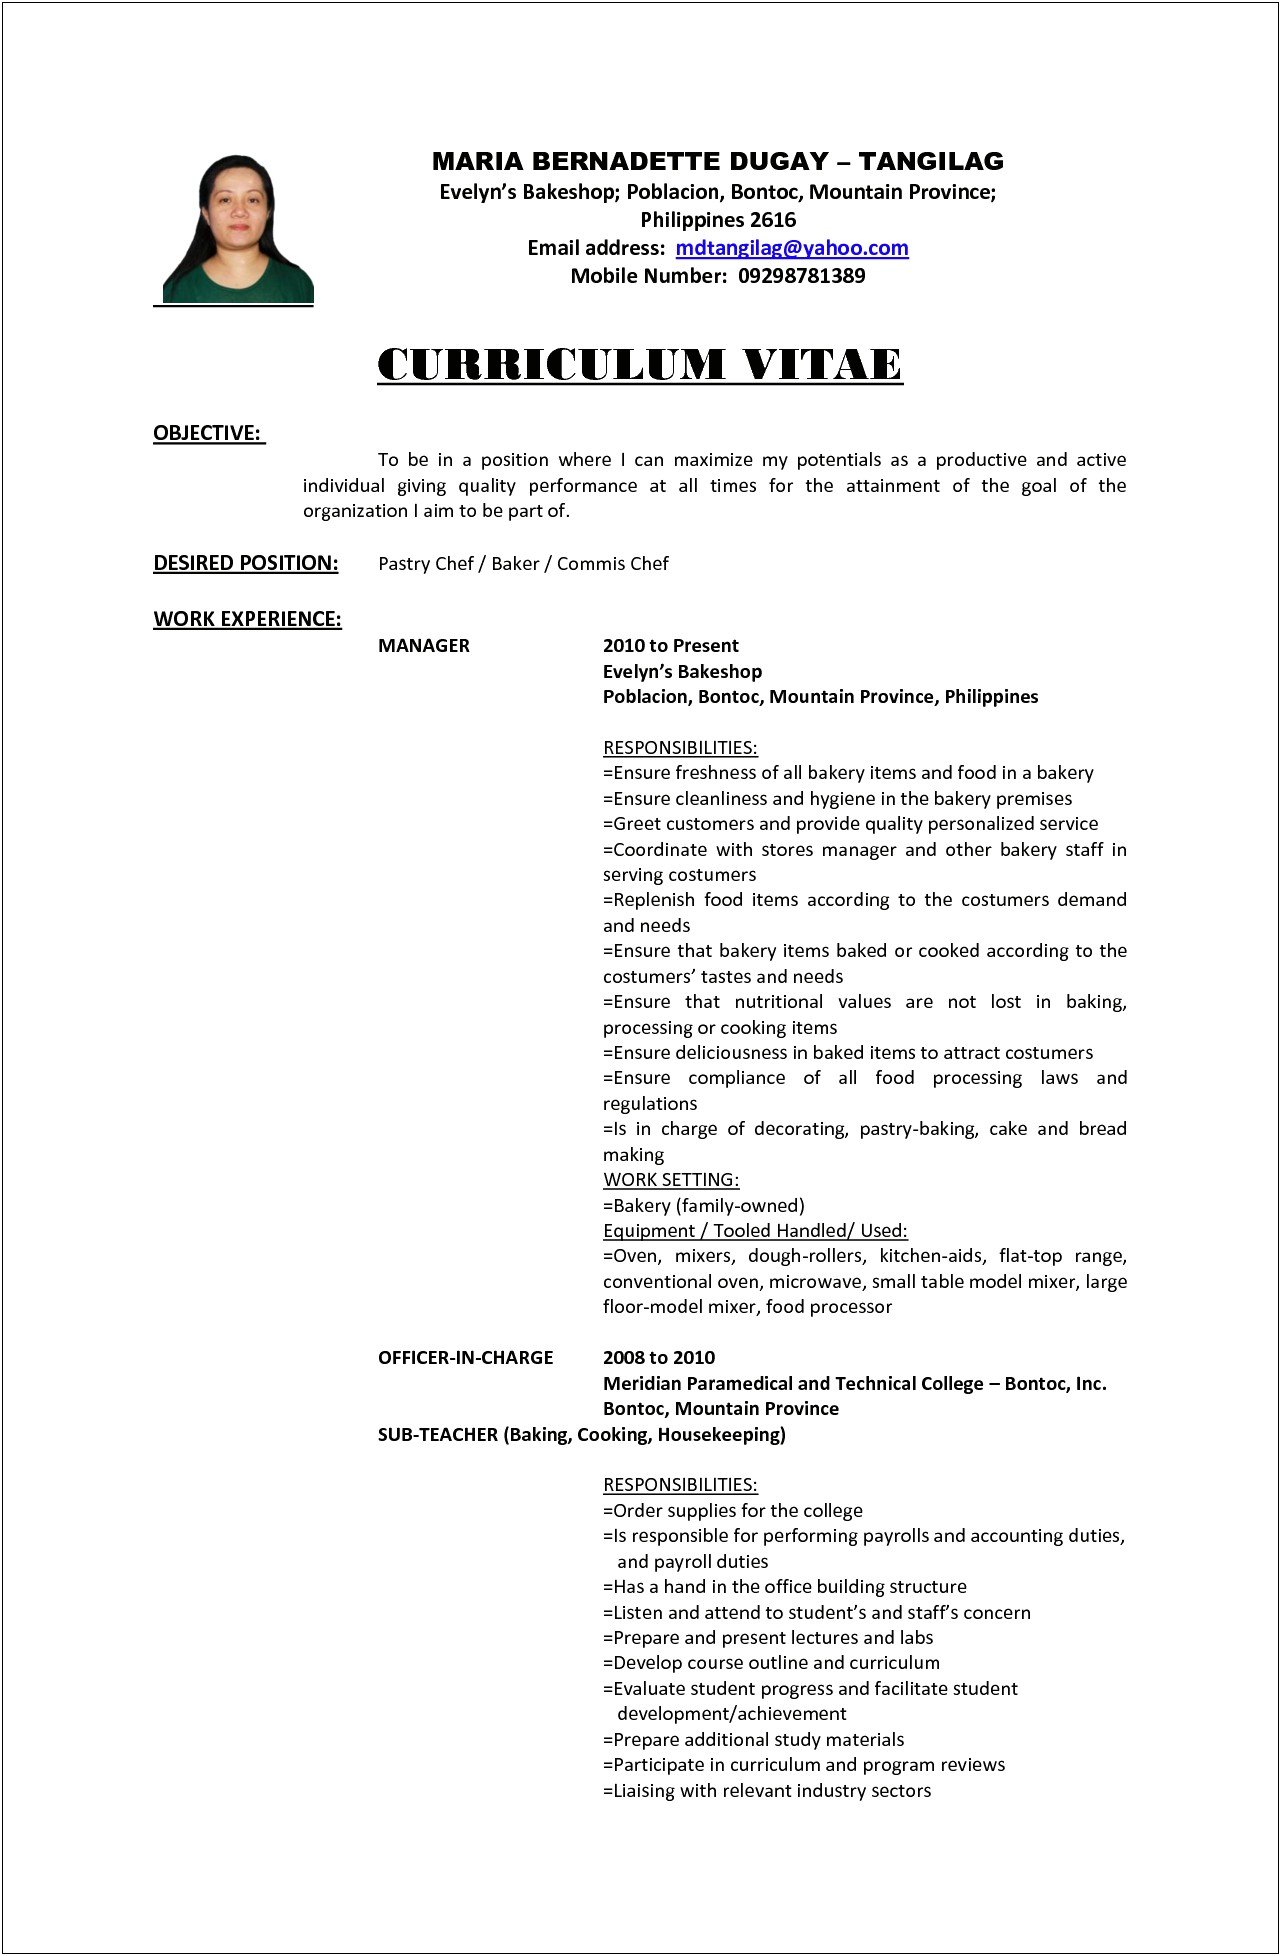 Objective On Resume Coal Miner